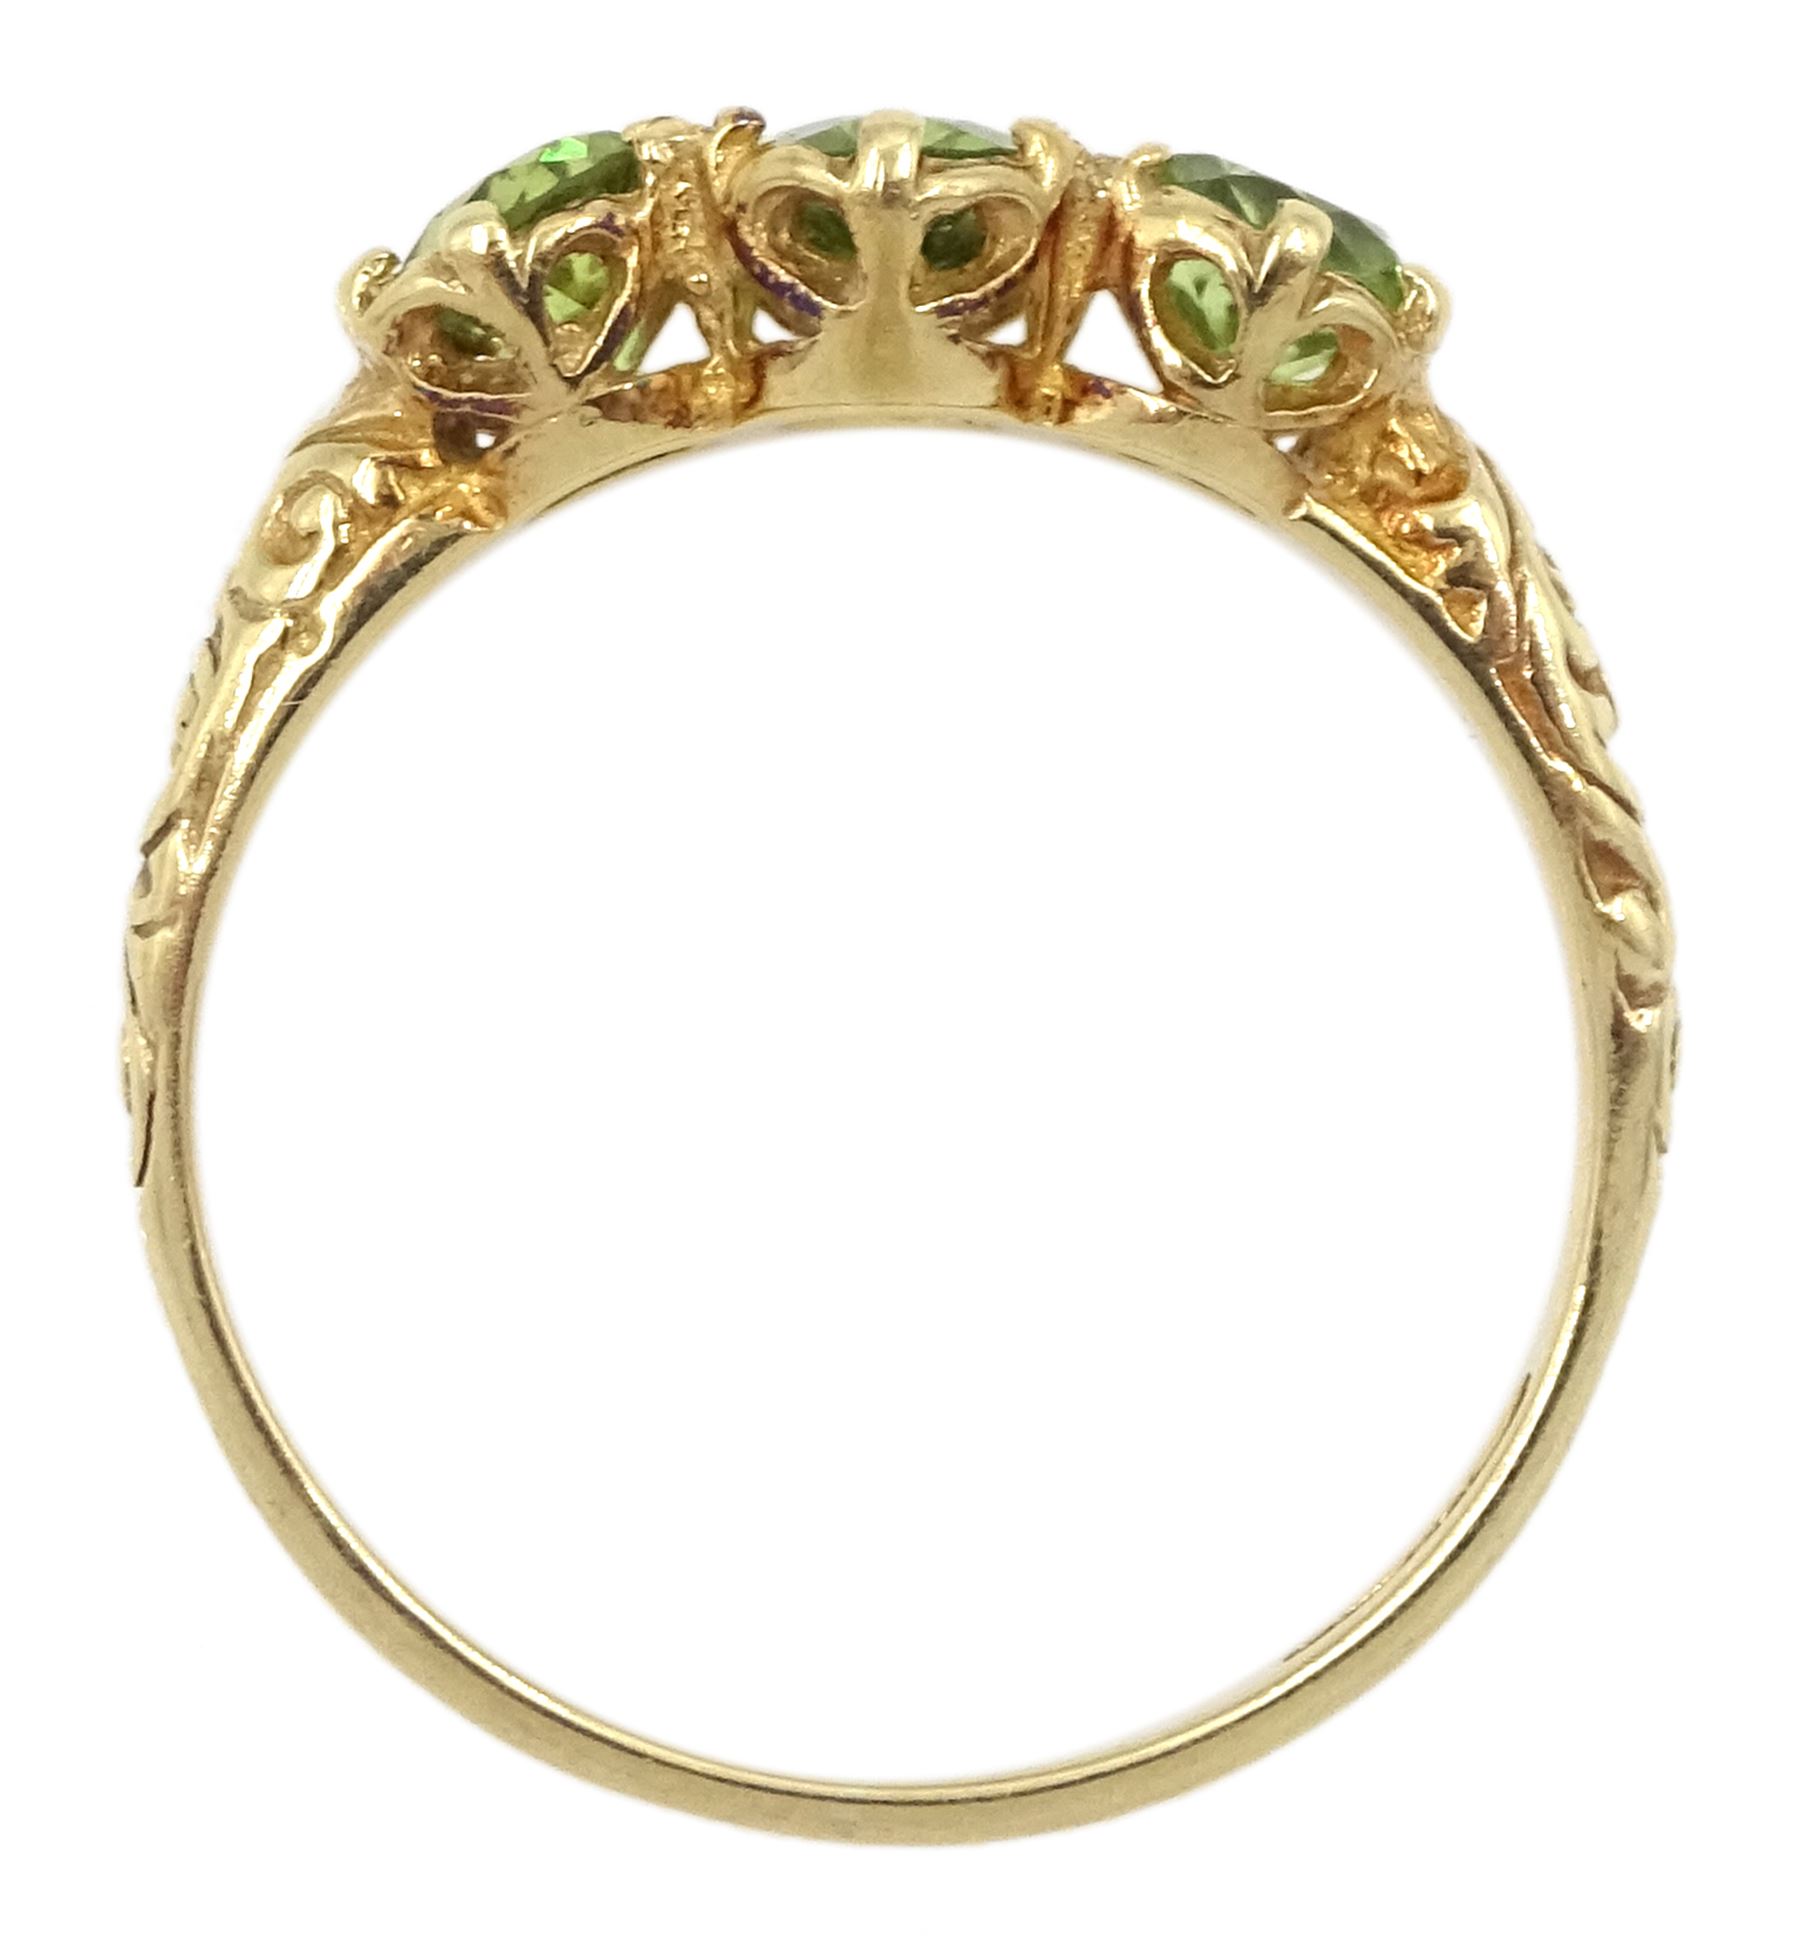 9ct gold three stone peridot ring with scroll design shoulders - Image 3 of 4